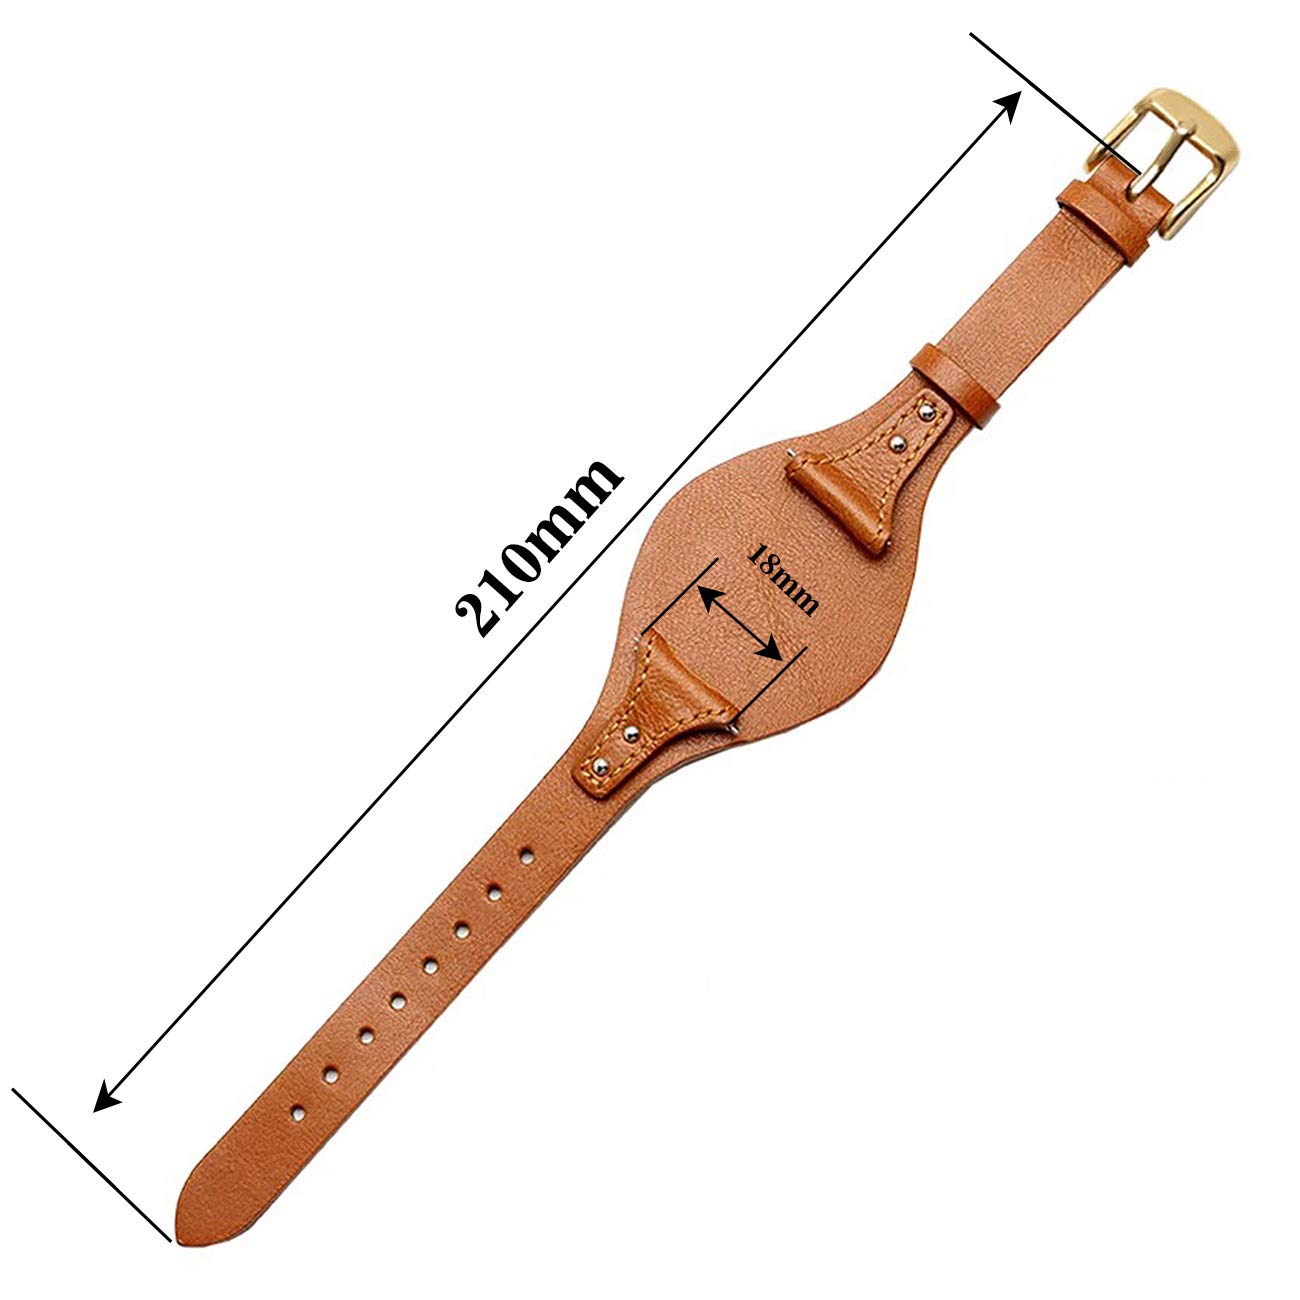 KAMIU Women's 18mm Quick Release Watch Band Genuine Calf Leather Replacement Fossil Straps Watch Strap for ES4114 ES4113 ES3625